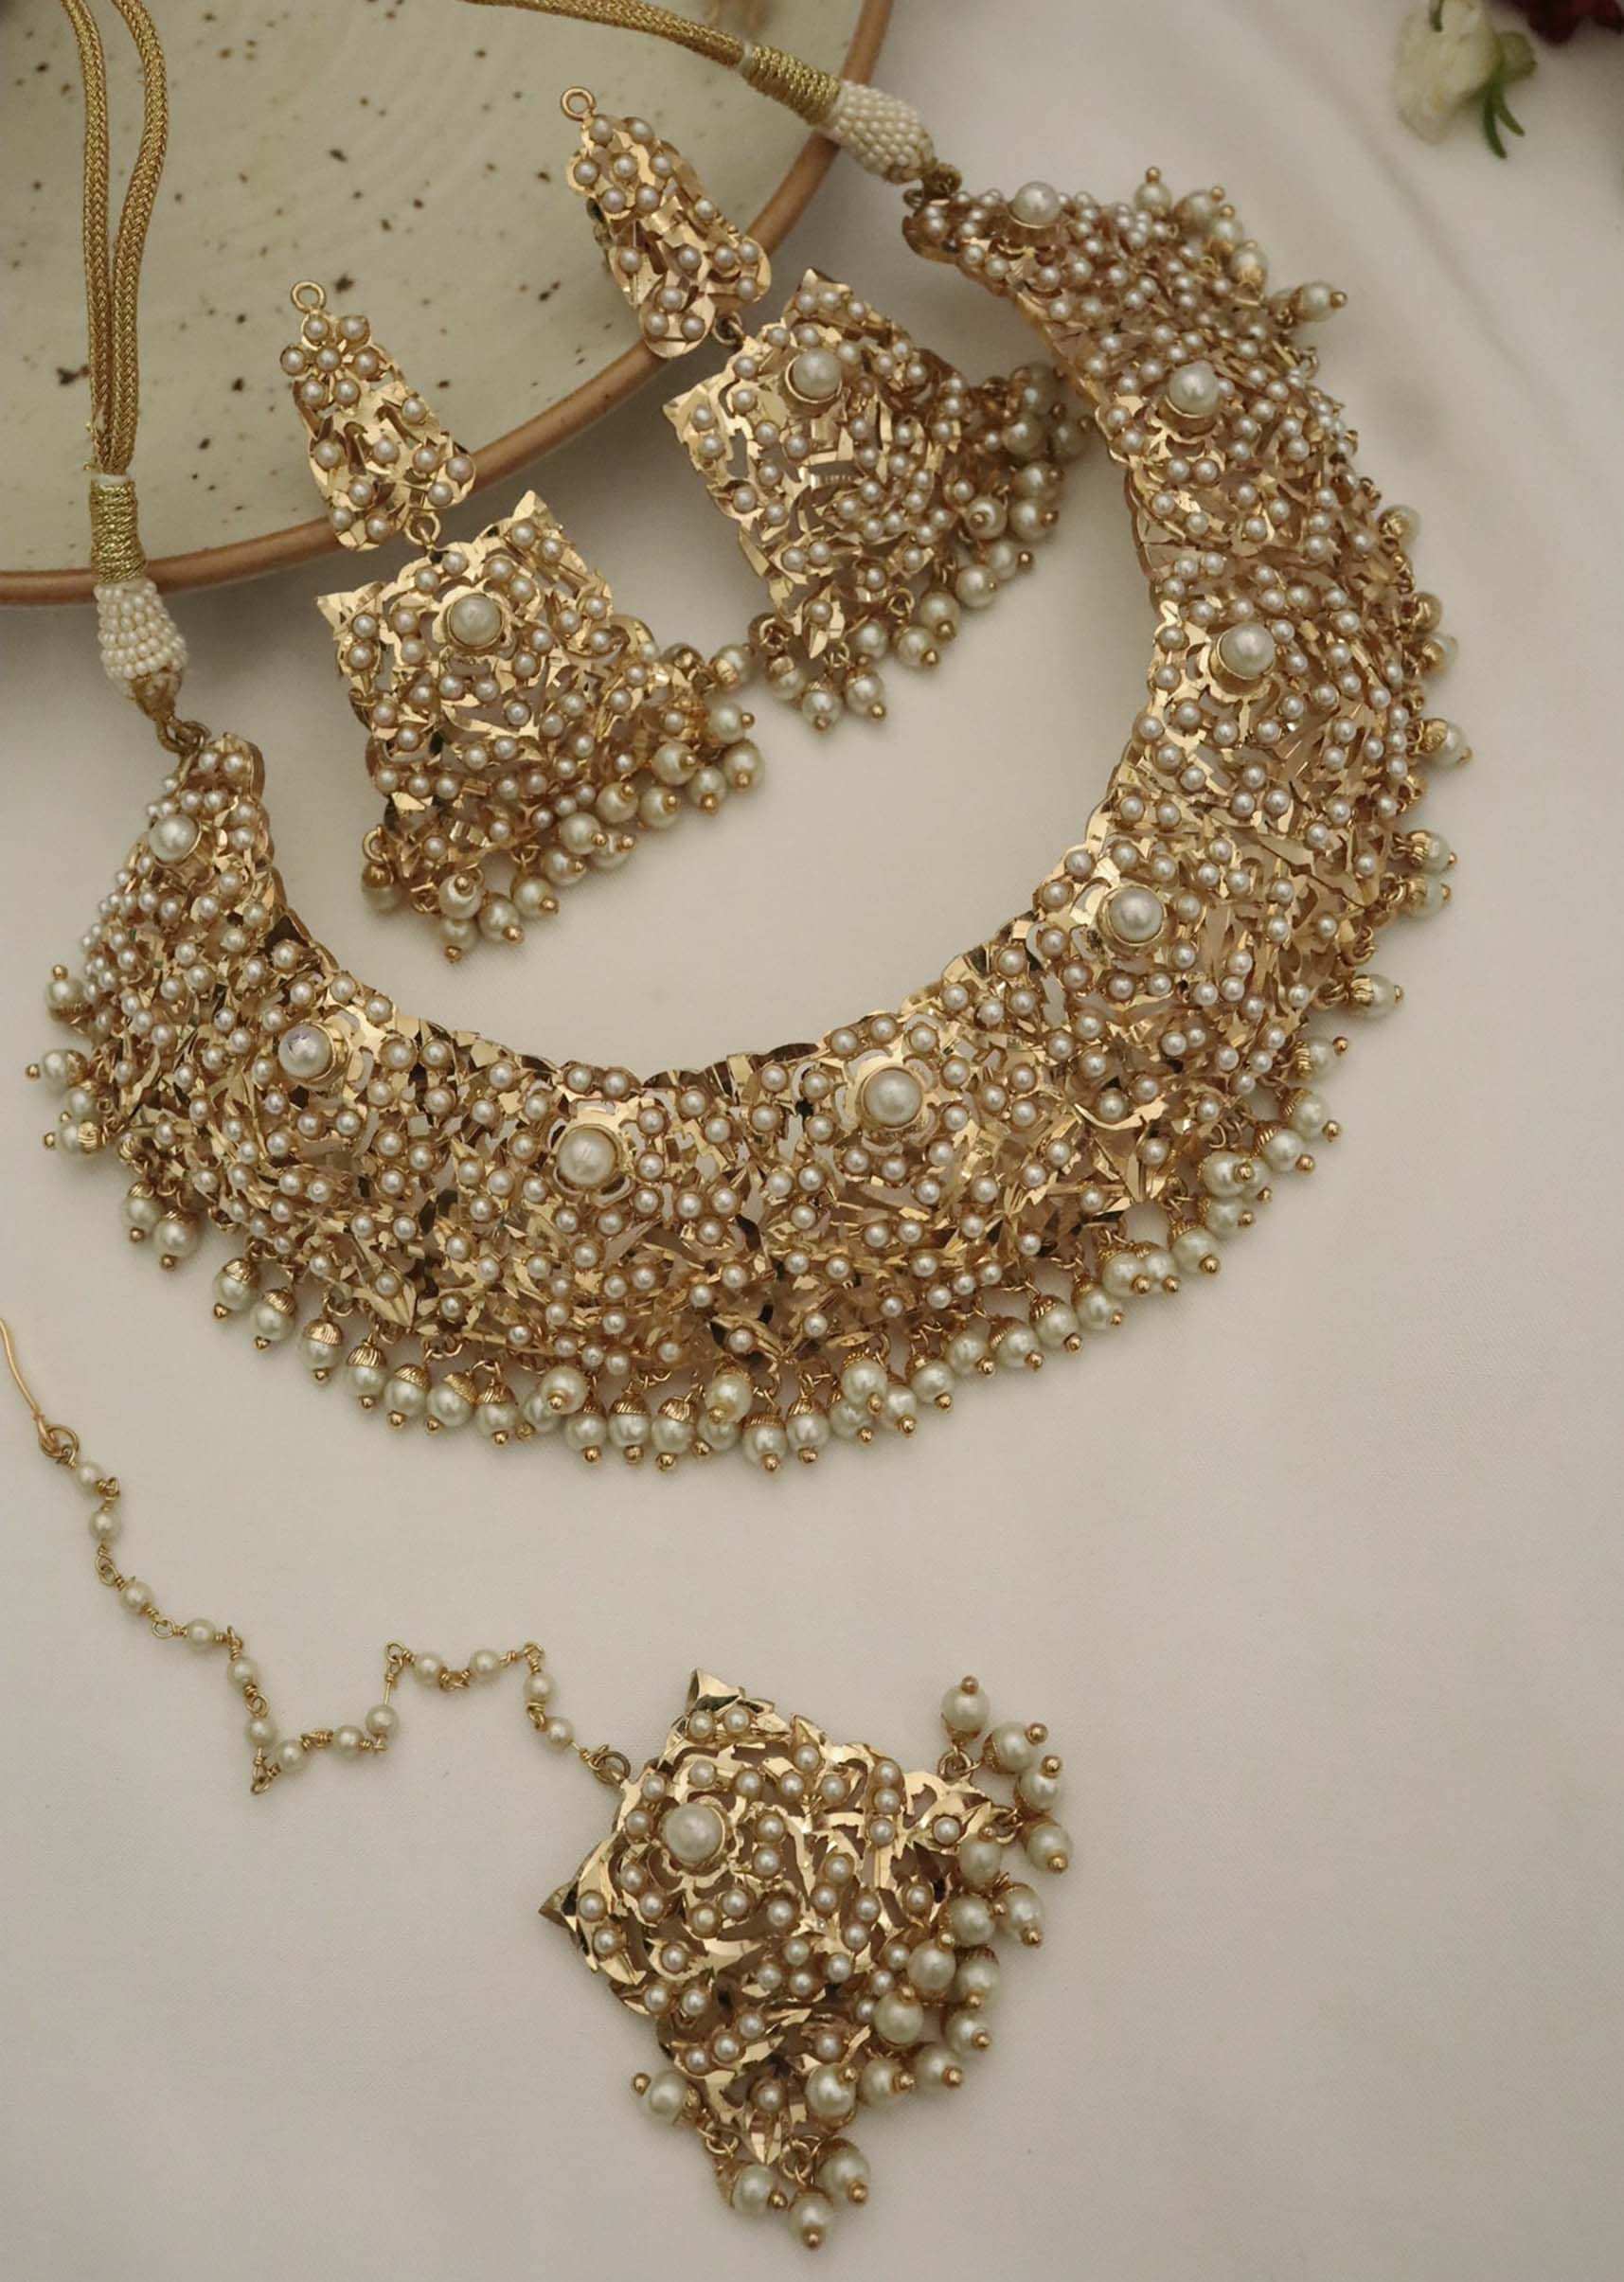 Gold Plated Necklace And Earrings Set With Pearls And Semi Precious Stones In Jadau Inspired Design